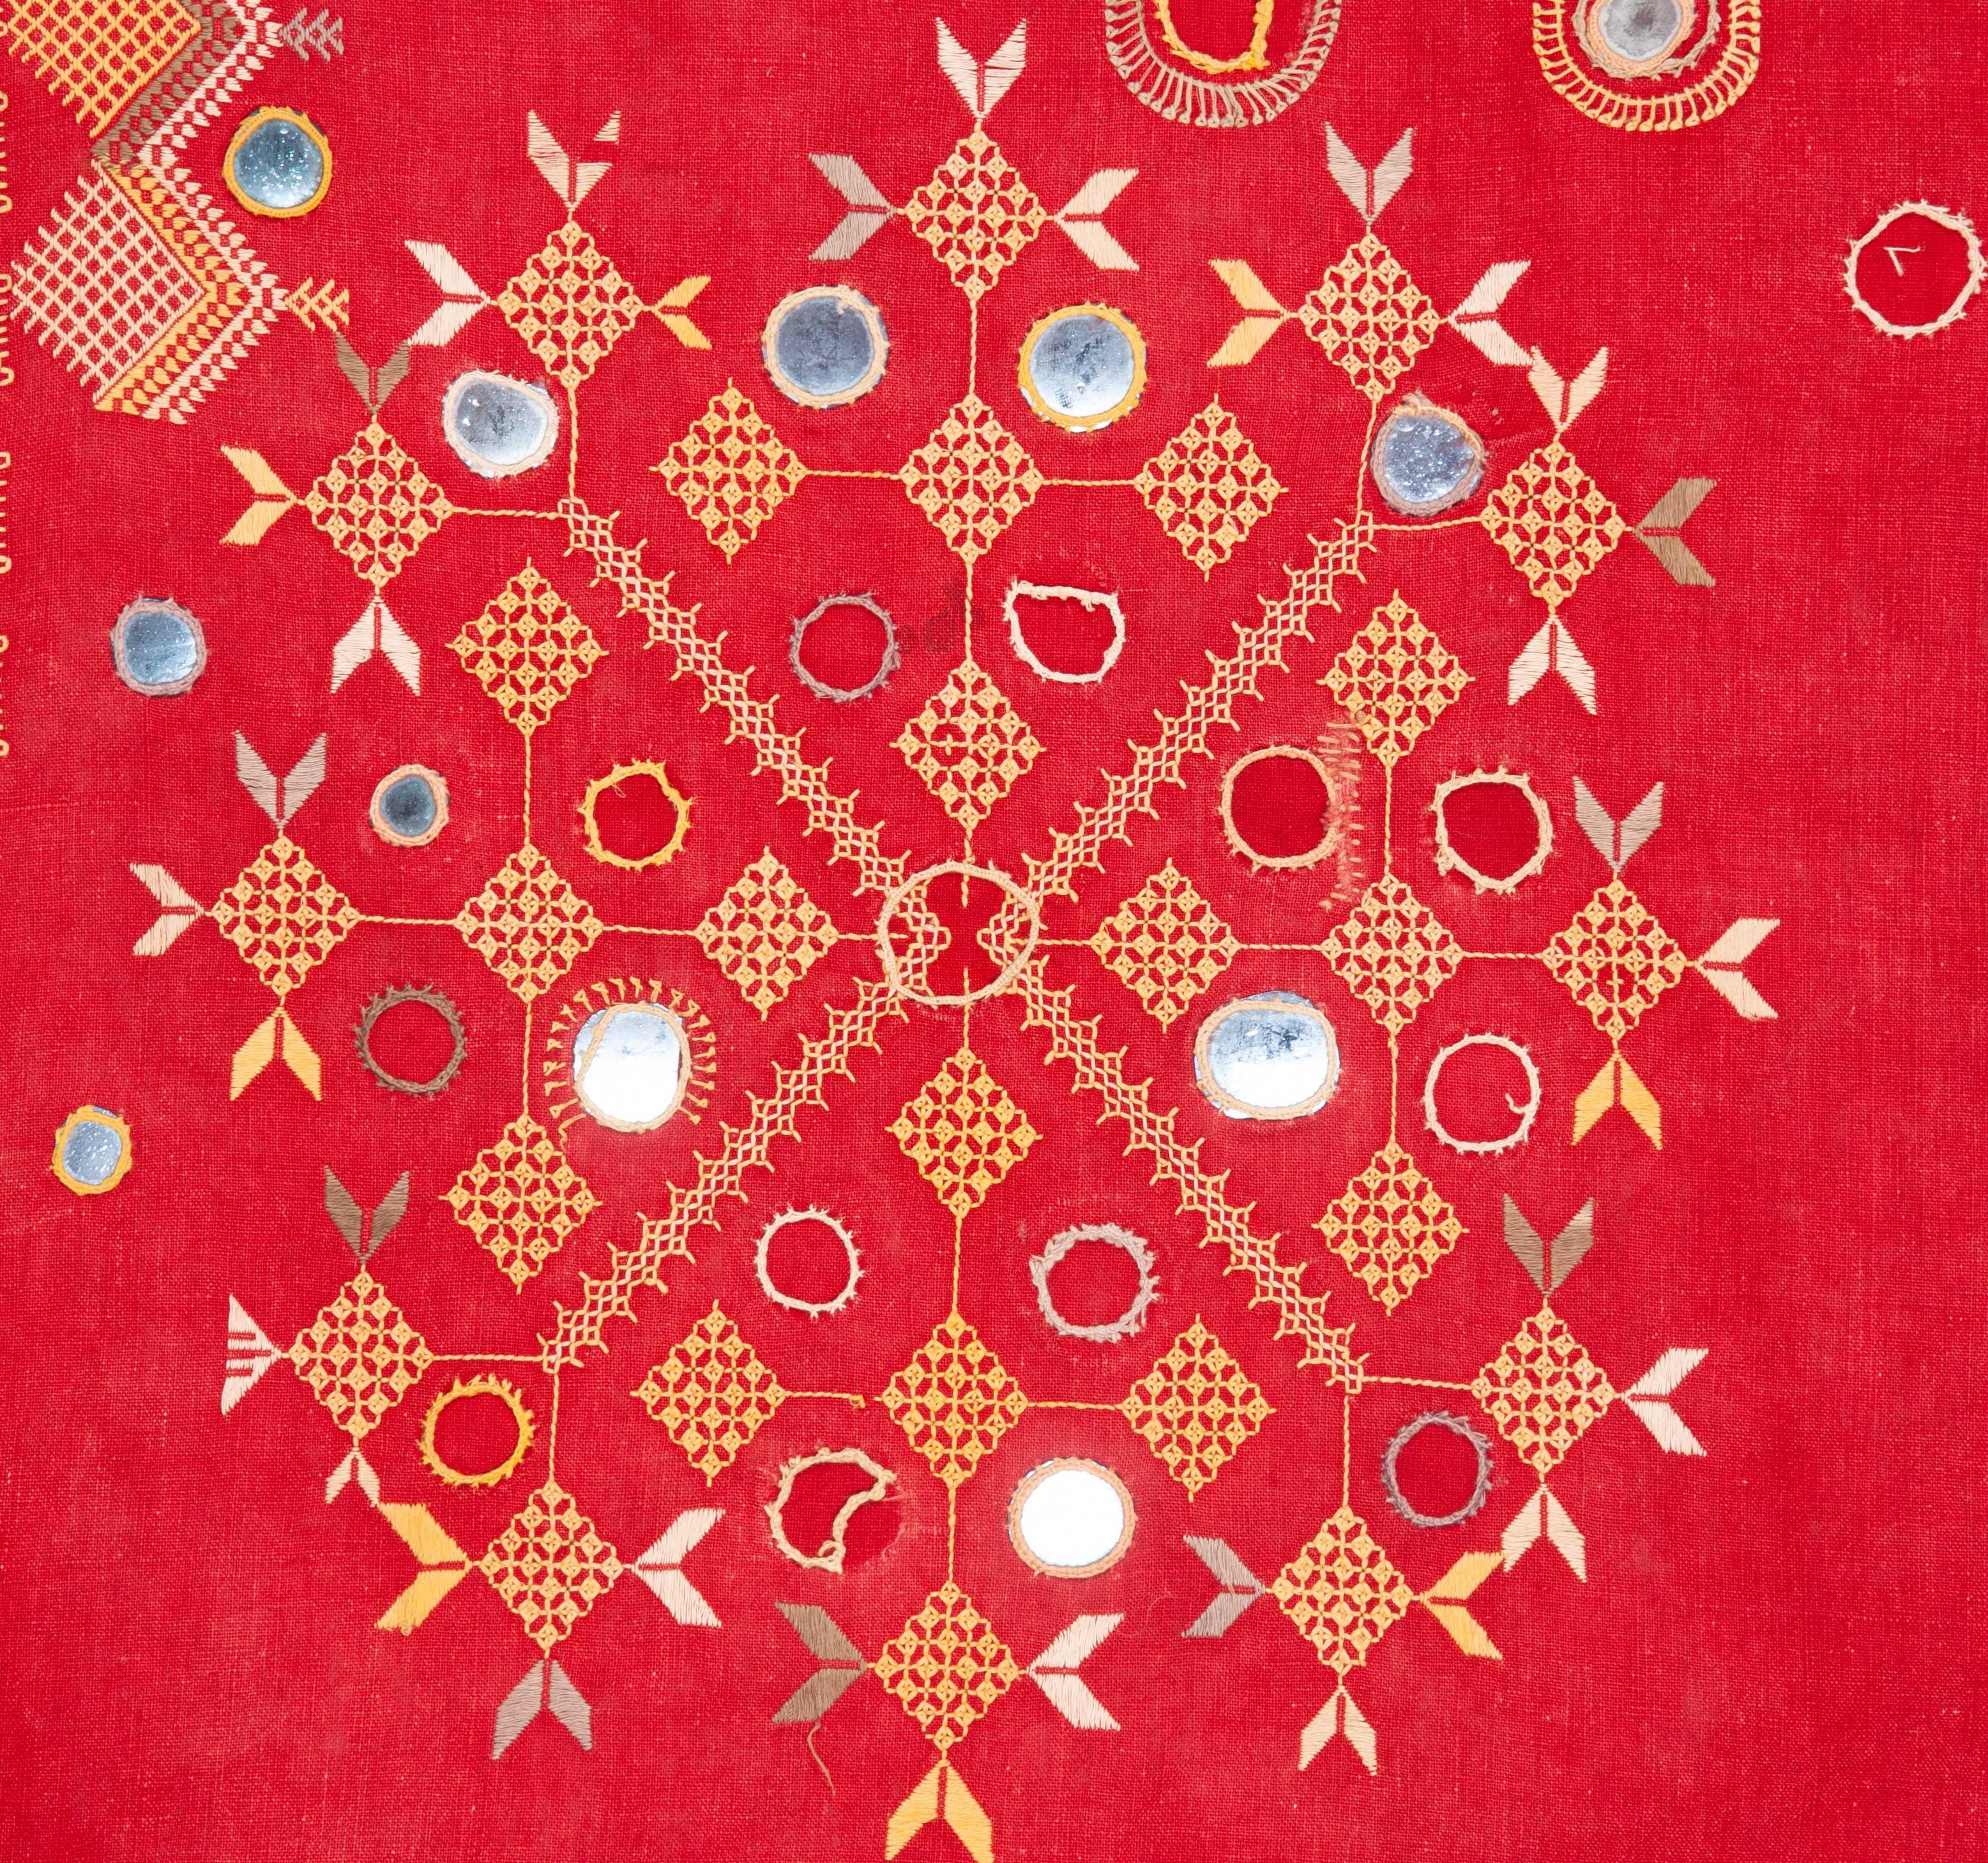 embroidery of rajasthan